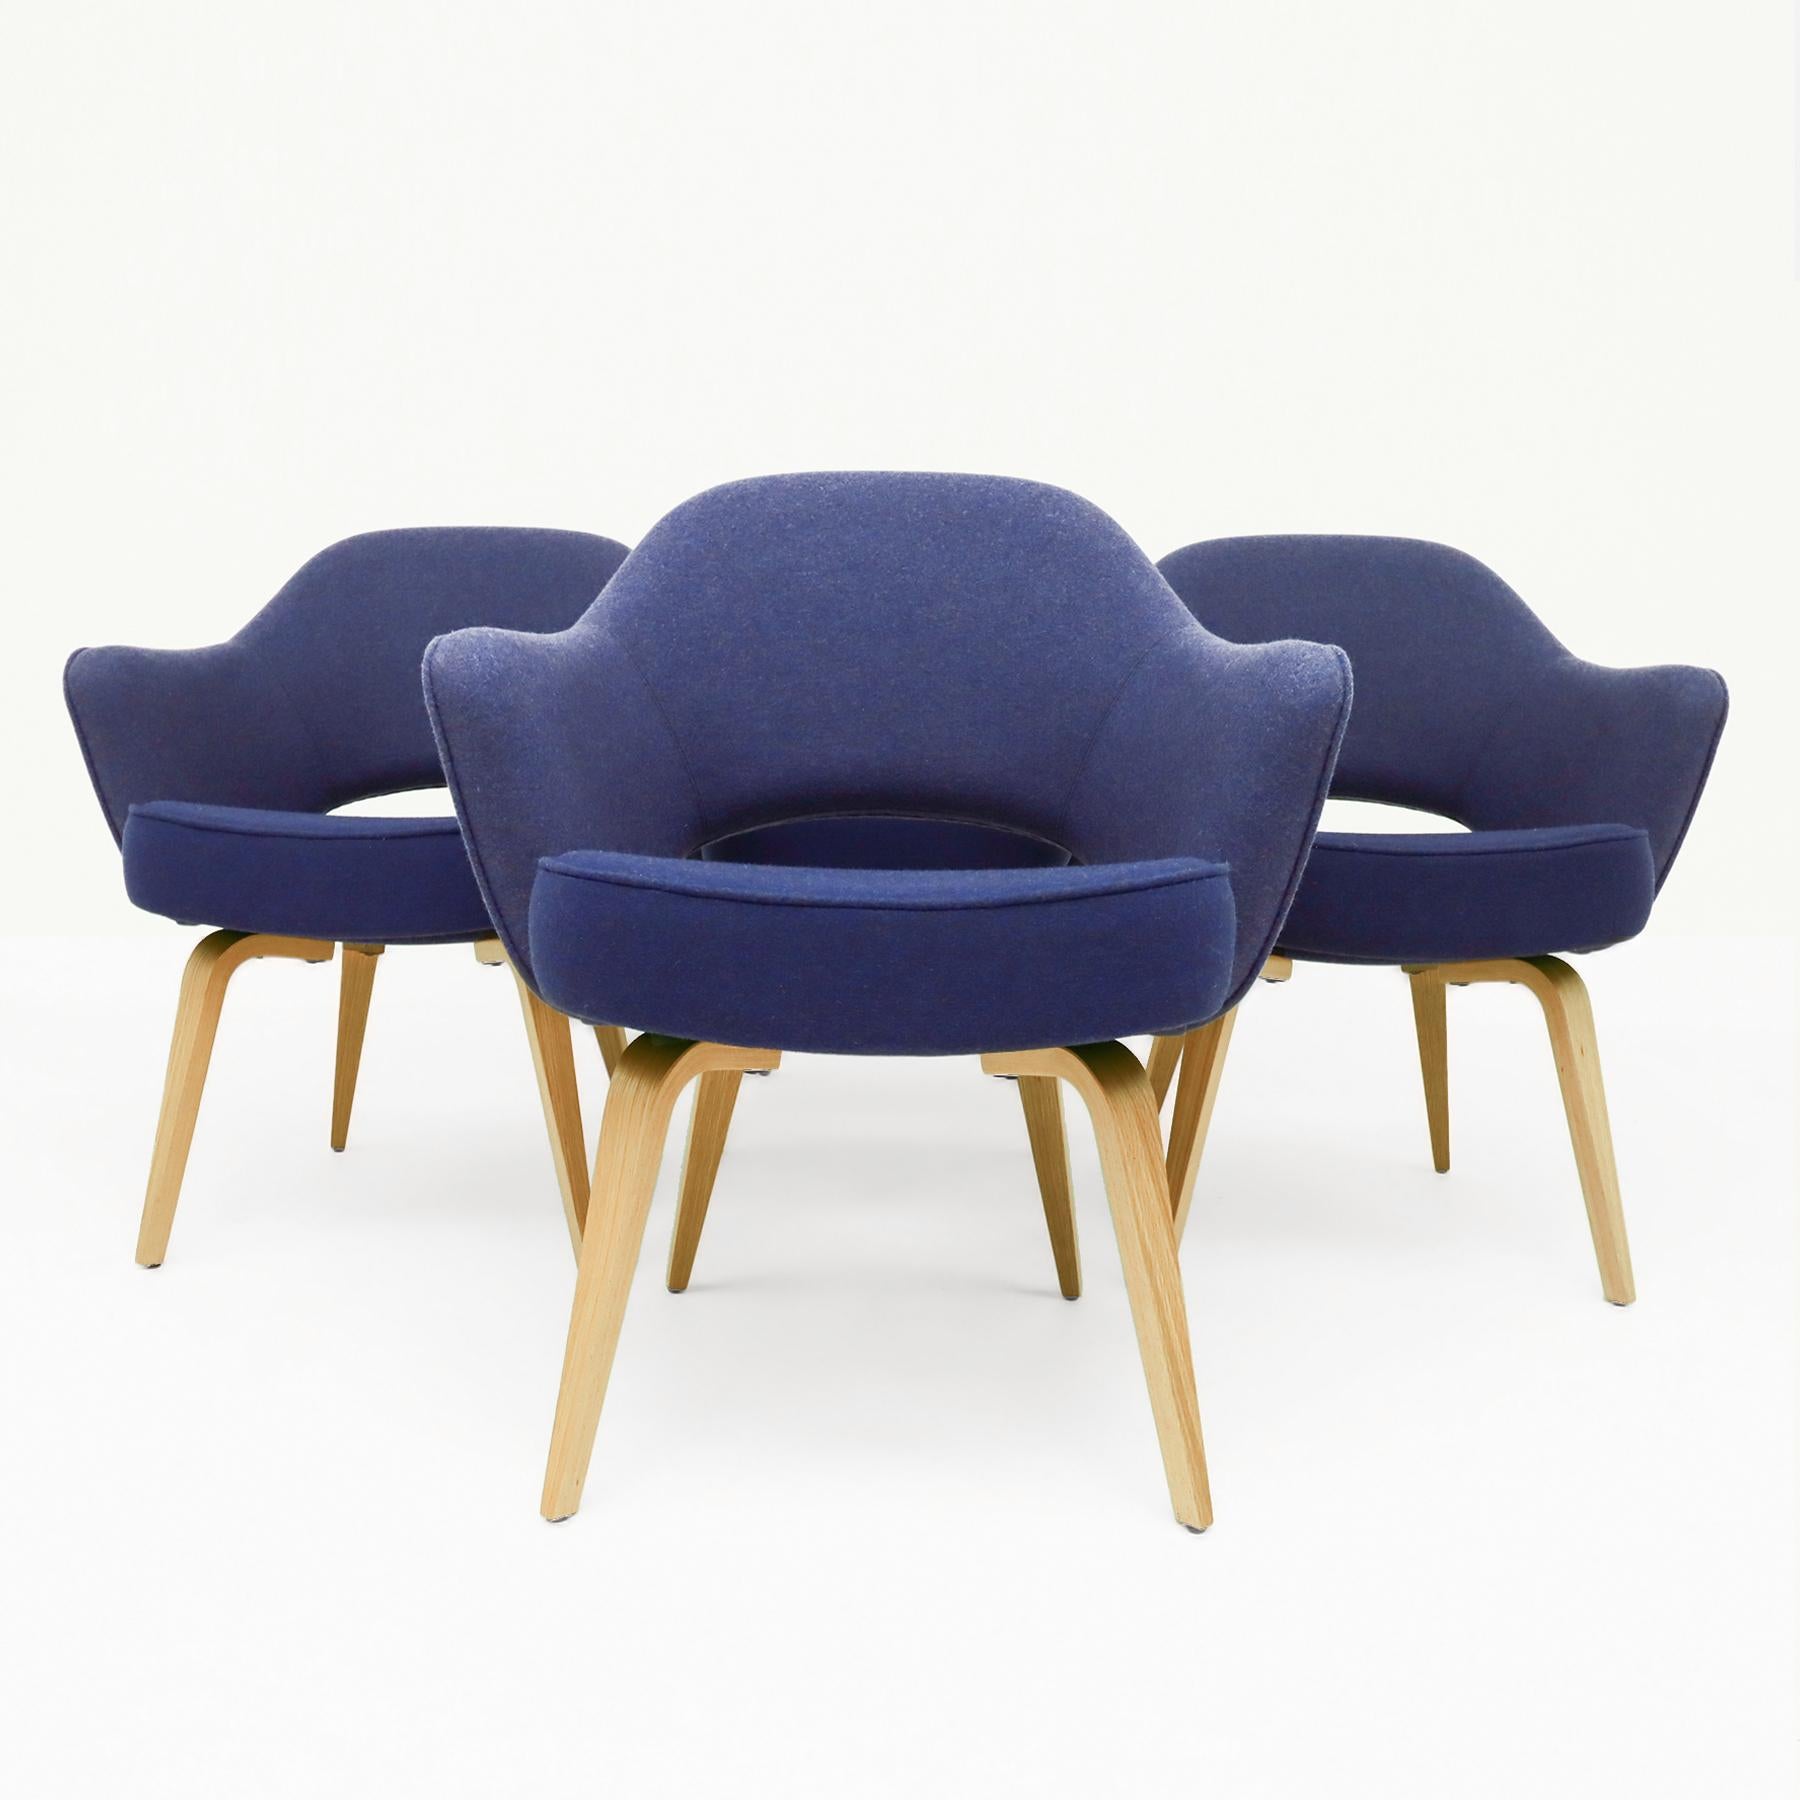 A classic set of 4 vintage Eero Saarininen Knoll Inc. executive armchairs in the original Knoll blue fabric with an oak frame base.

The Eero Saarinen Executive armchair was featured in nearly every Florence Knoll Mid Century interior throughout the